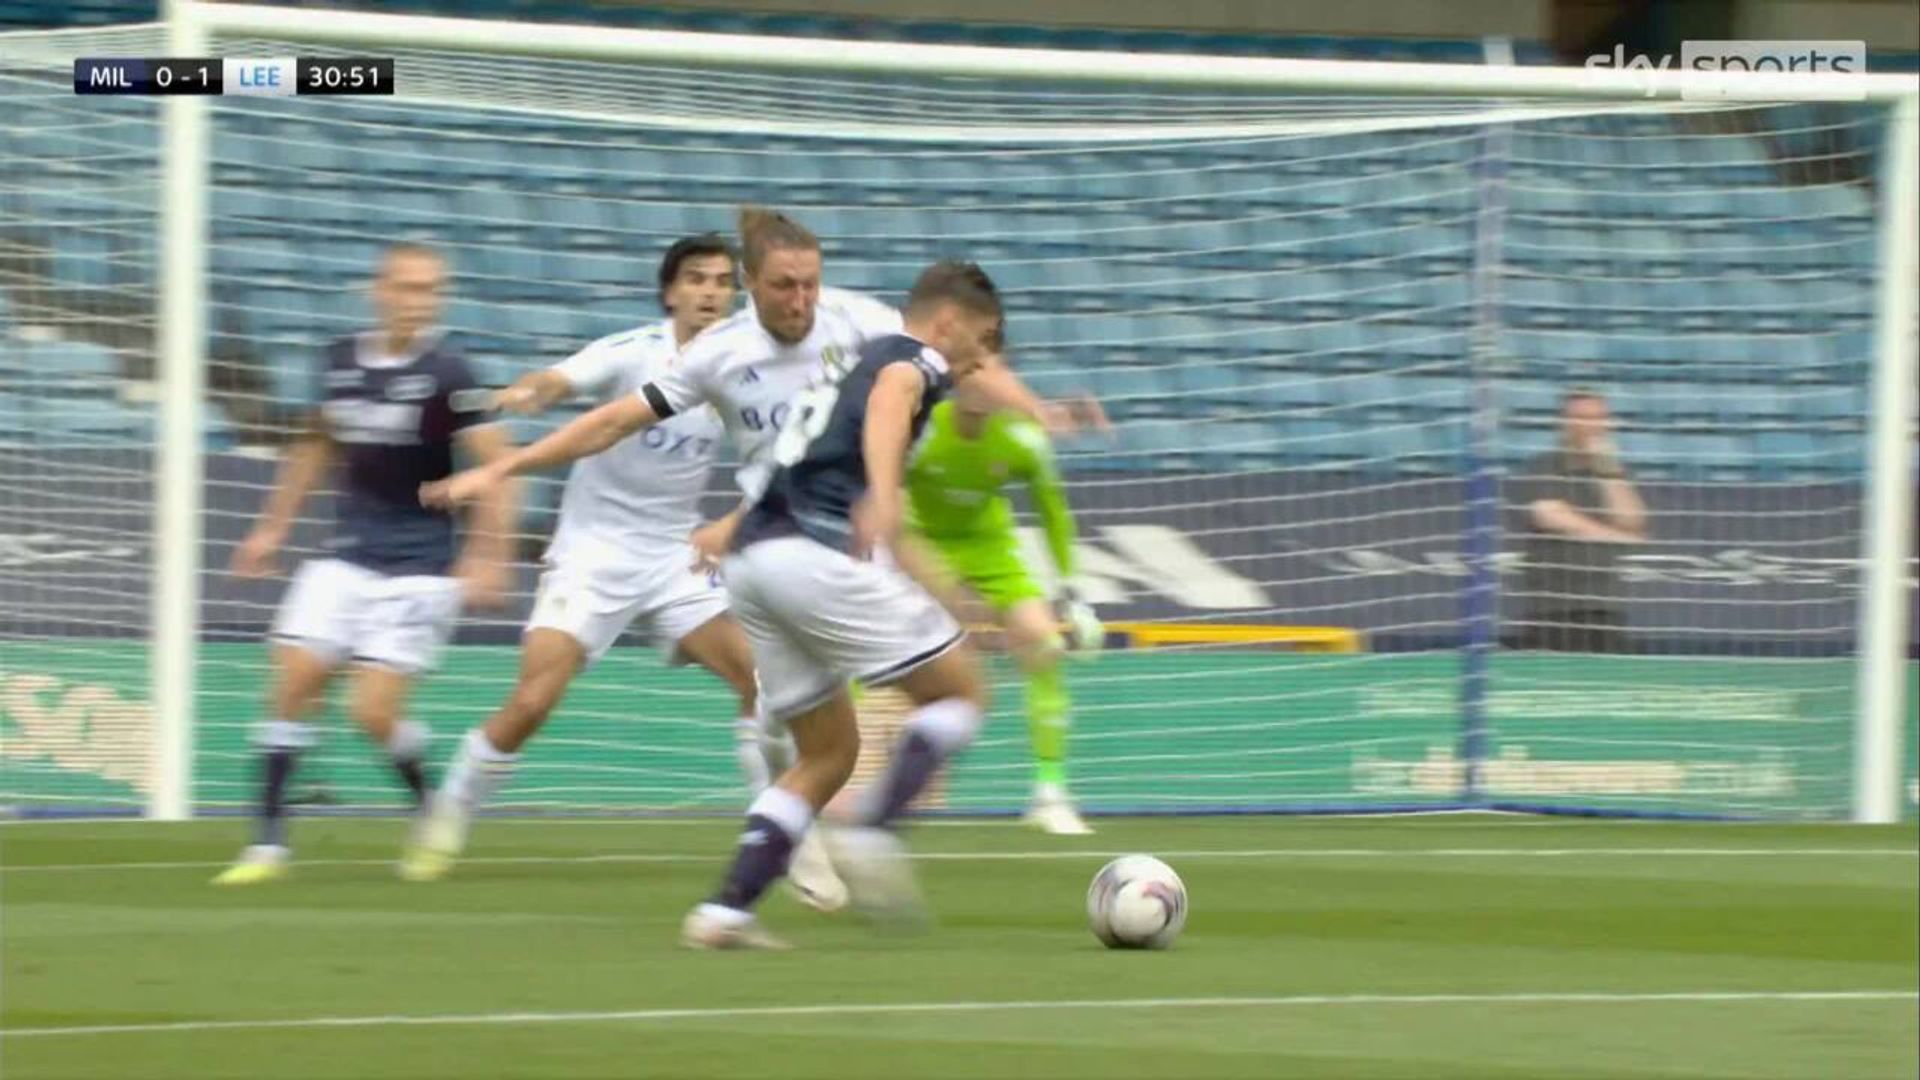 Longman denied by Meslier as Millwall search equaliser